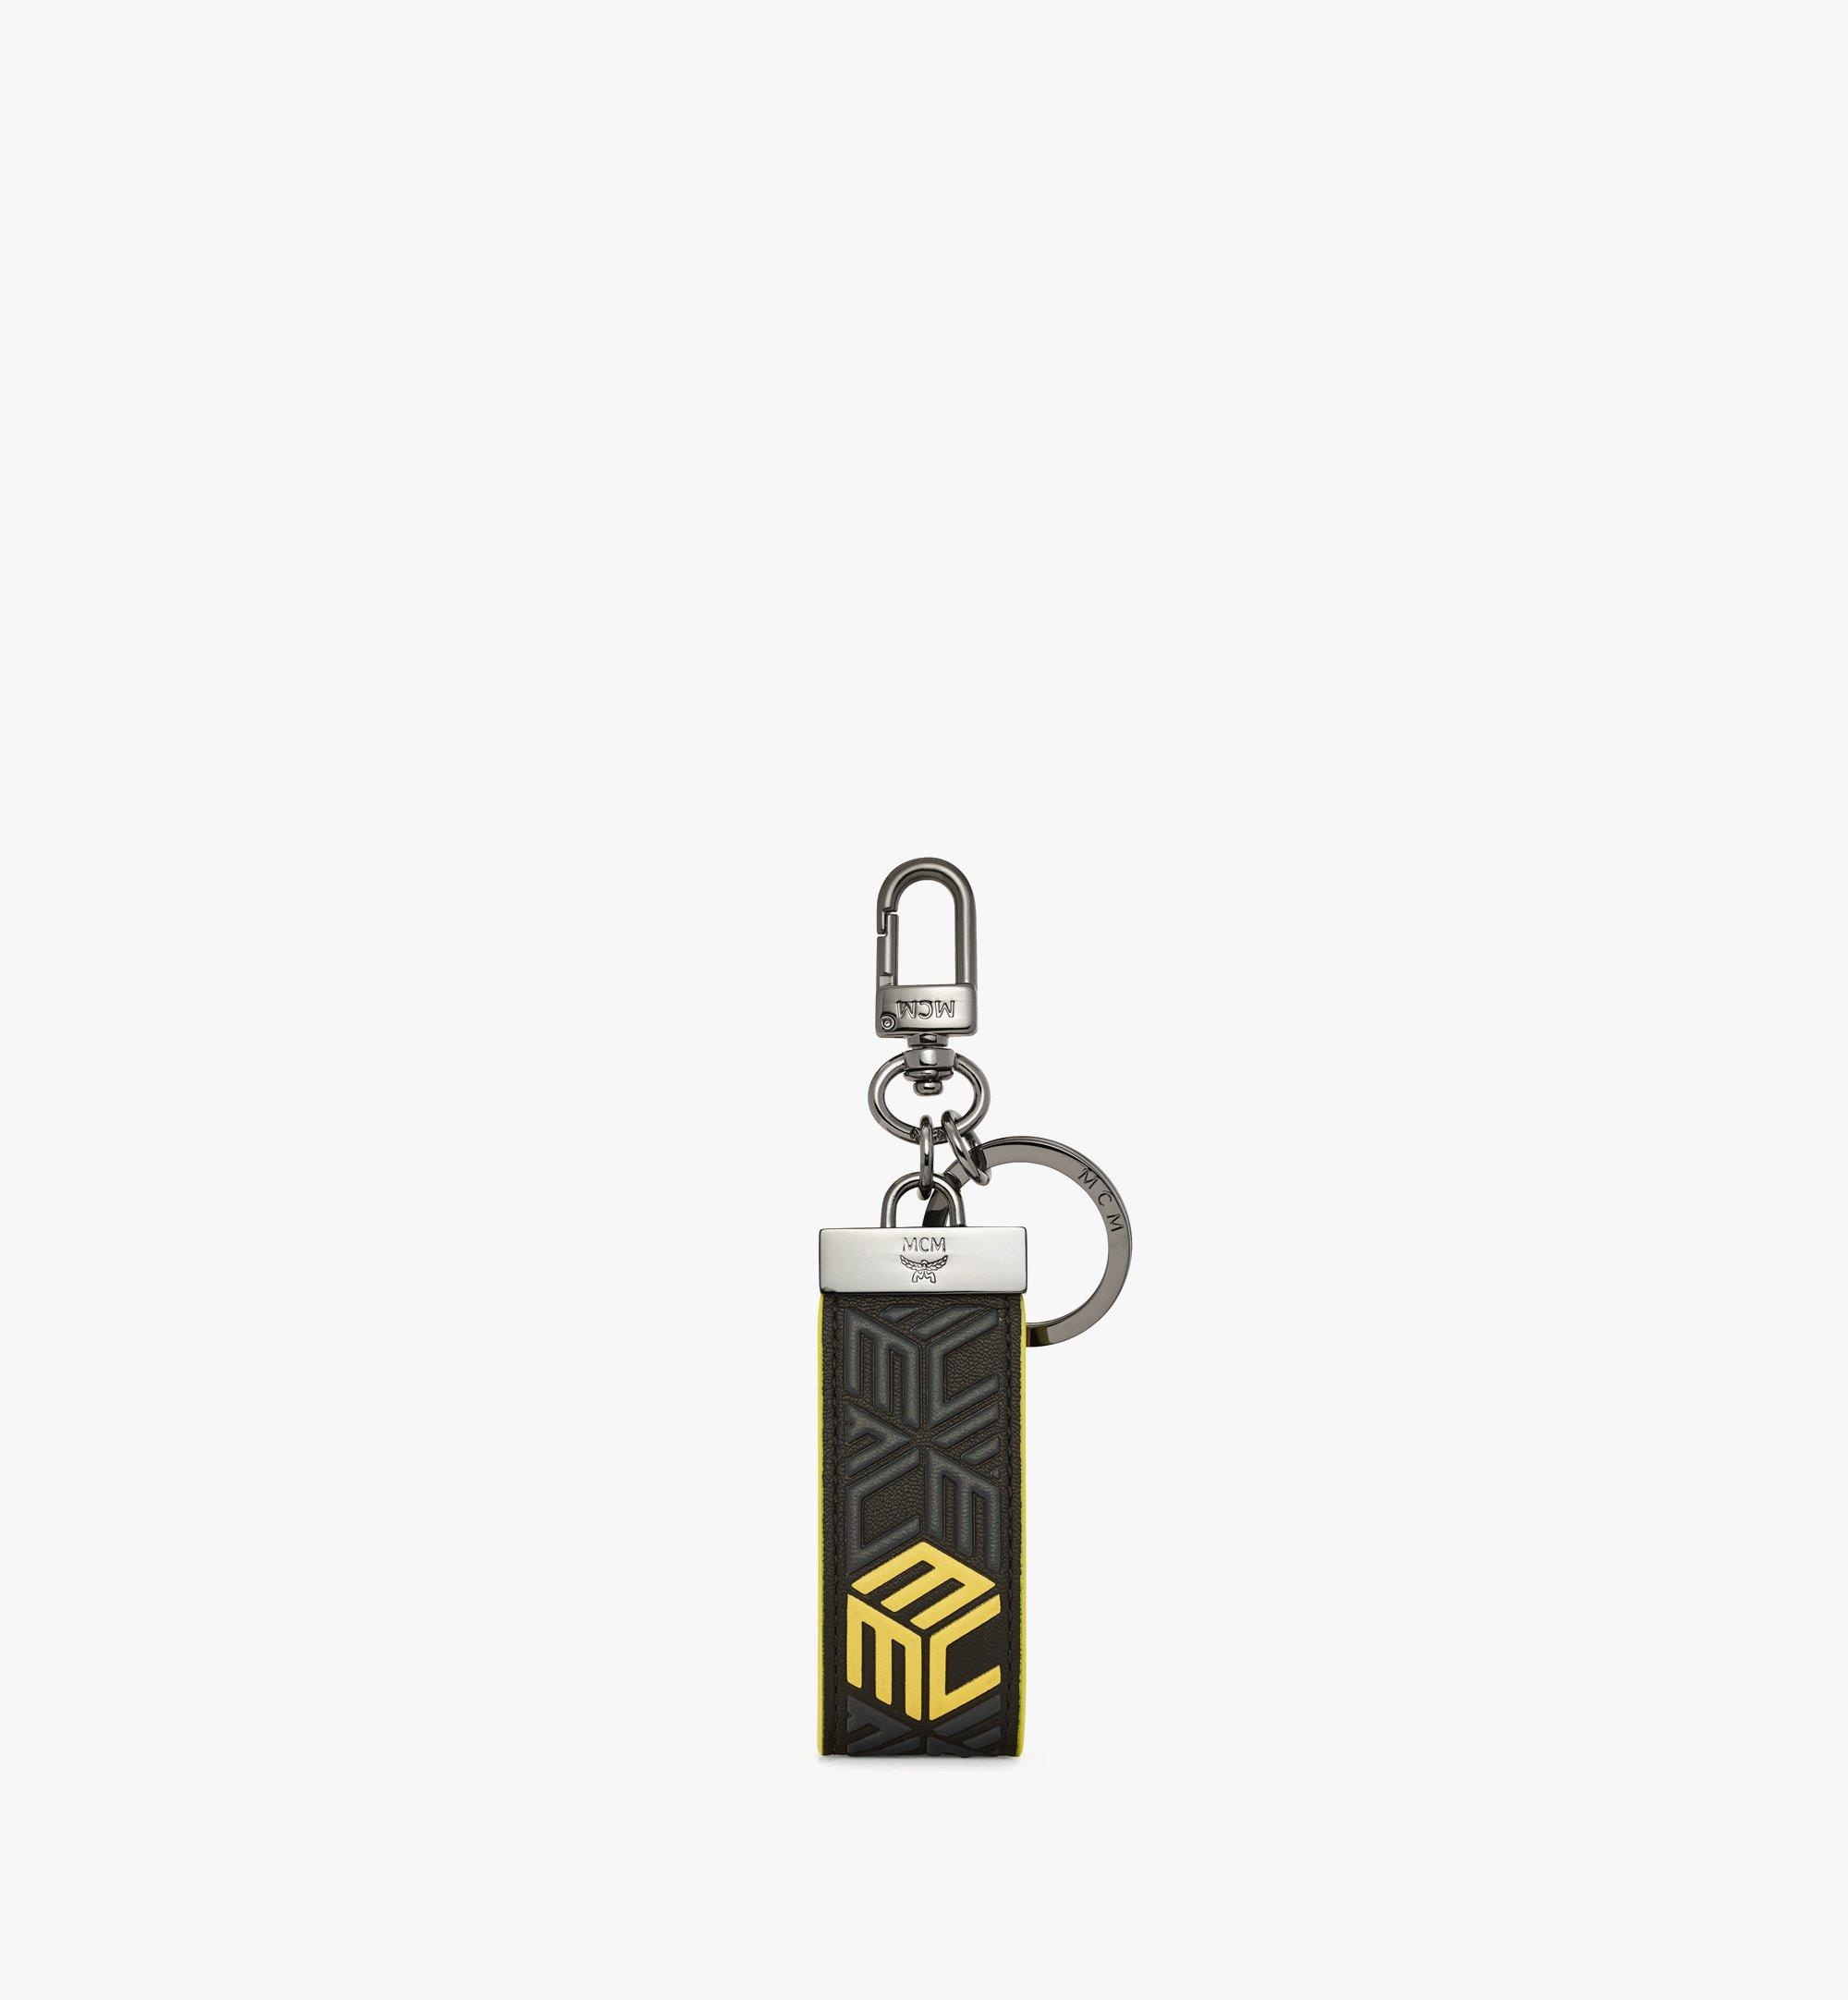 Key Ring in Cubic Monogram Leather - 1